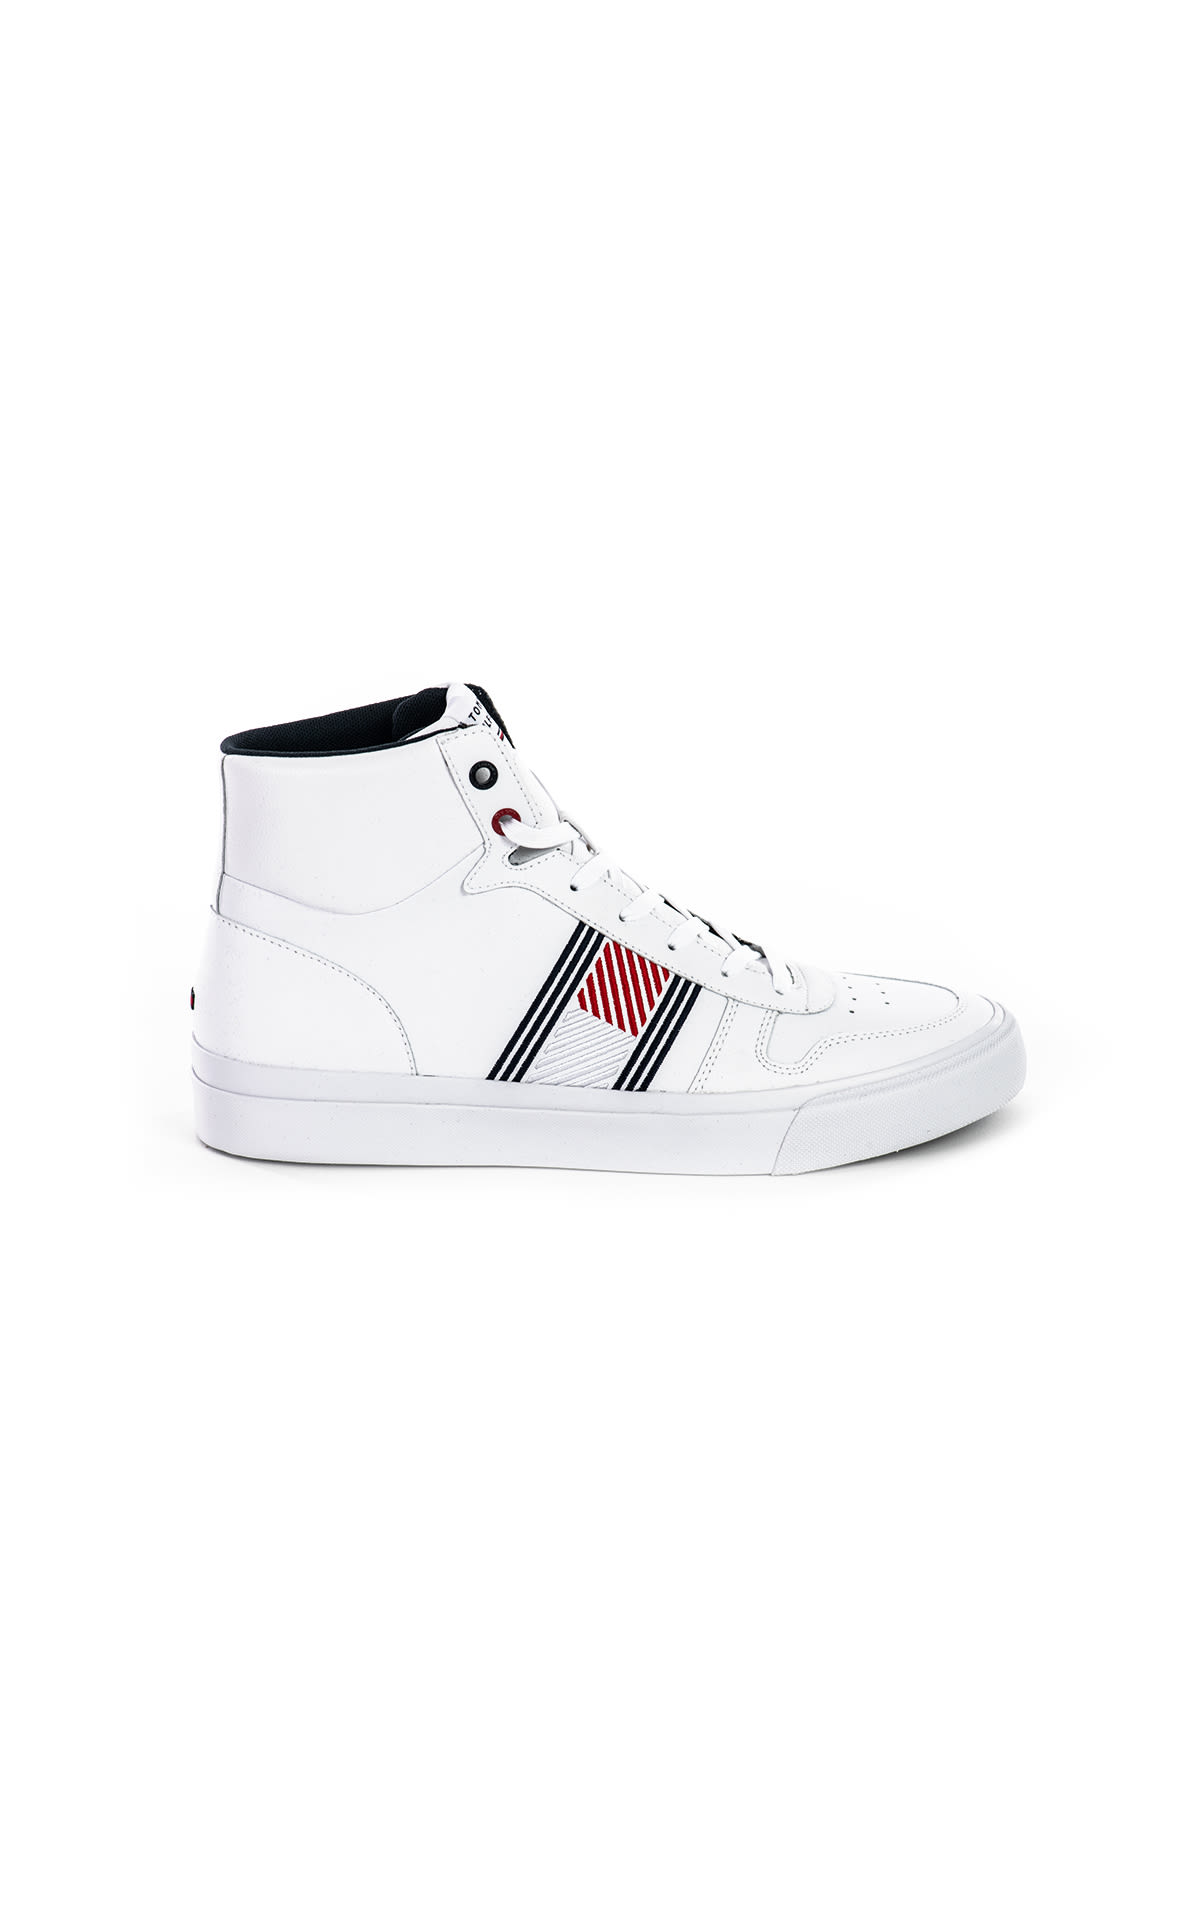 Tommy Hilfiger Leon sneakers